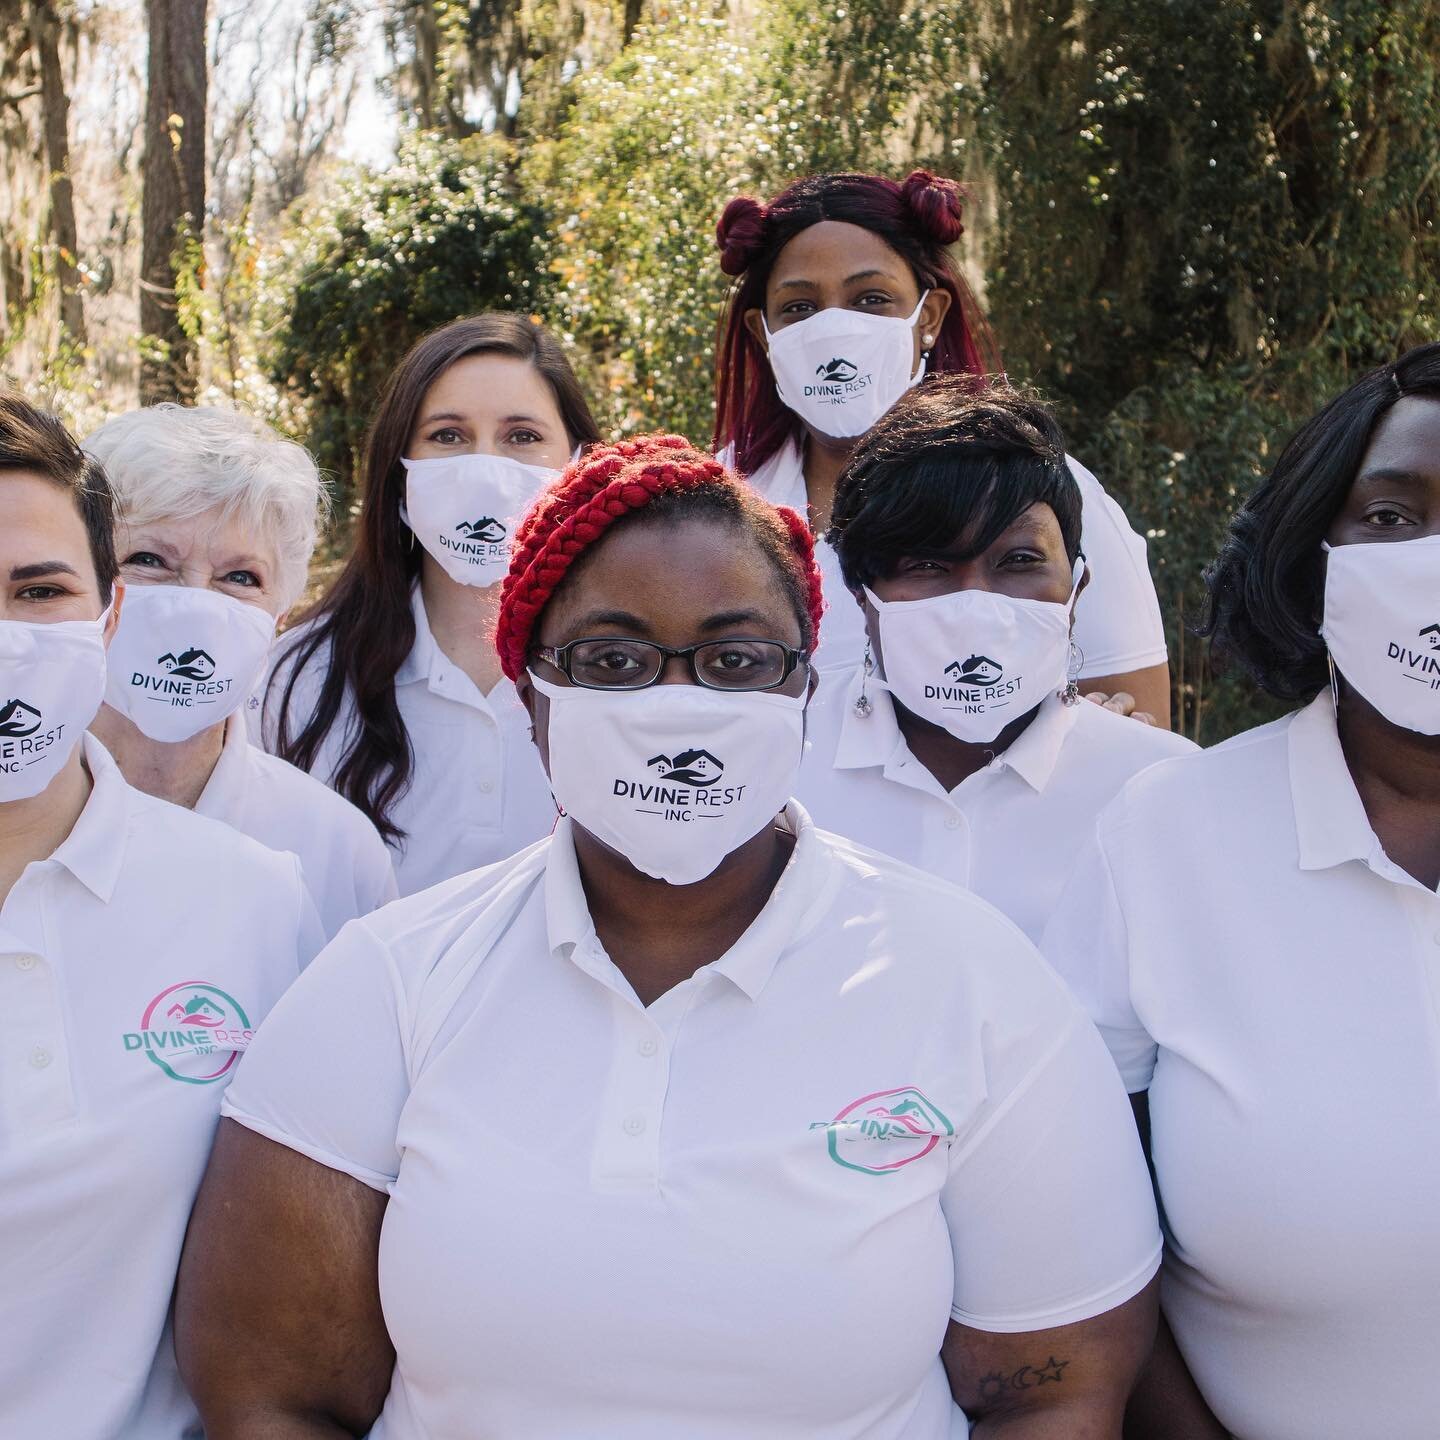 The faces behind the masks are the faces of those who serves our Neighbors living in the homeless camps. We are the Divine Rest Team! We love our Neighbors as ourselves!